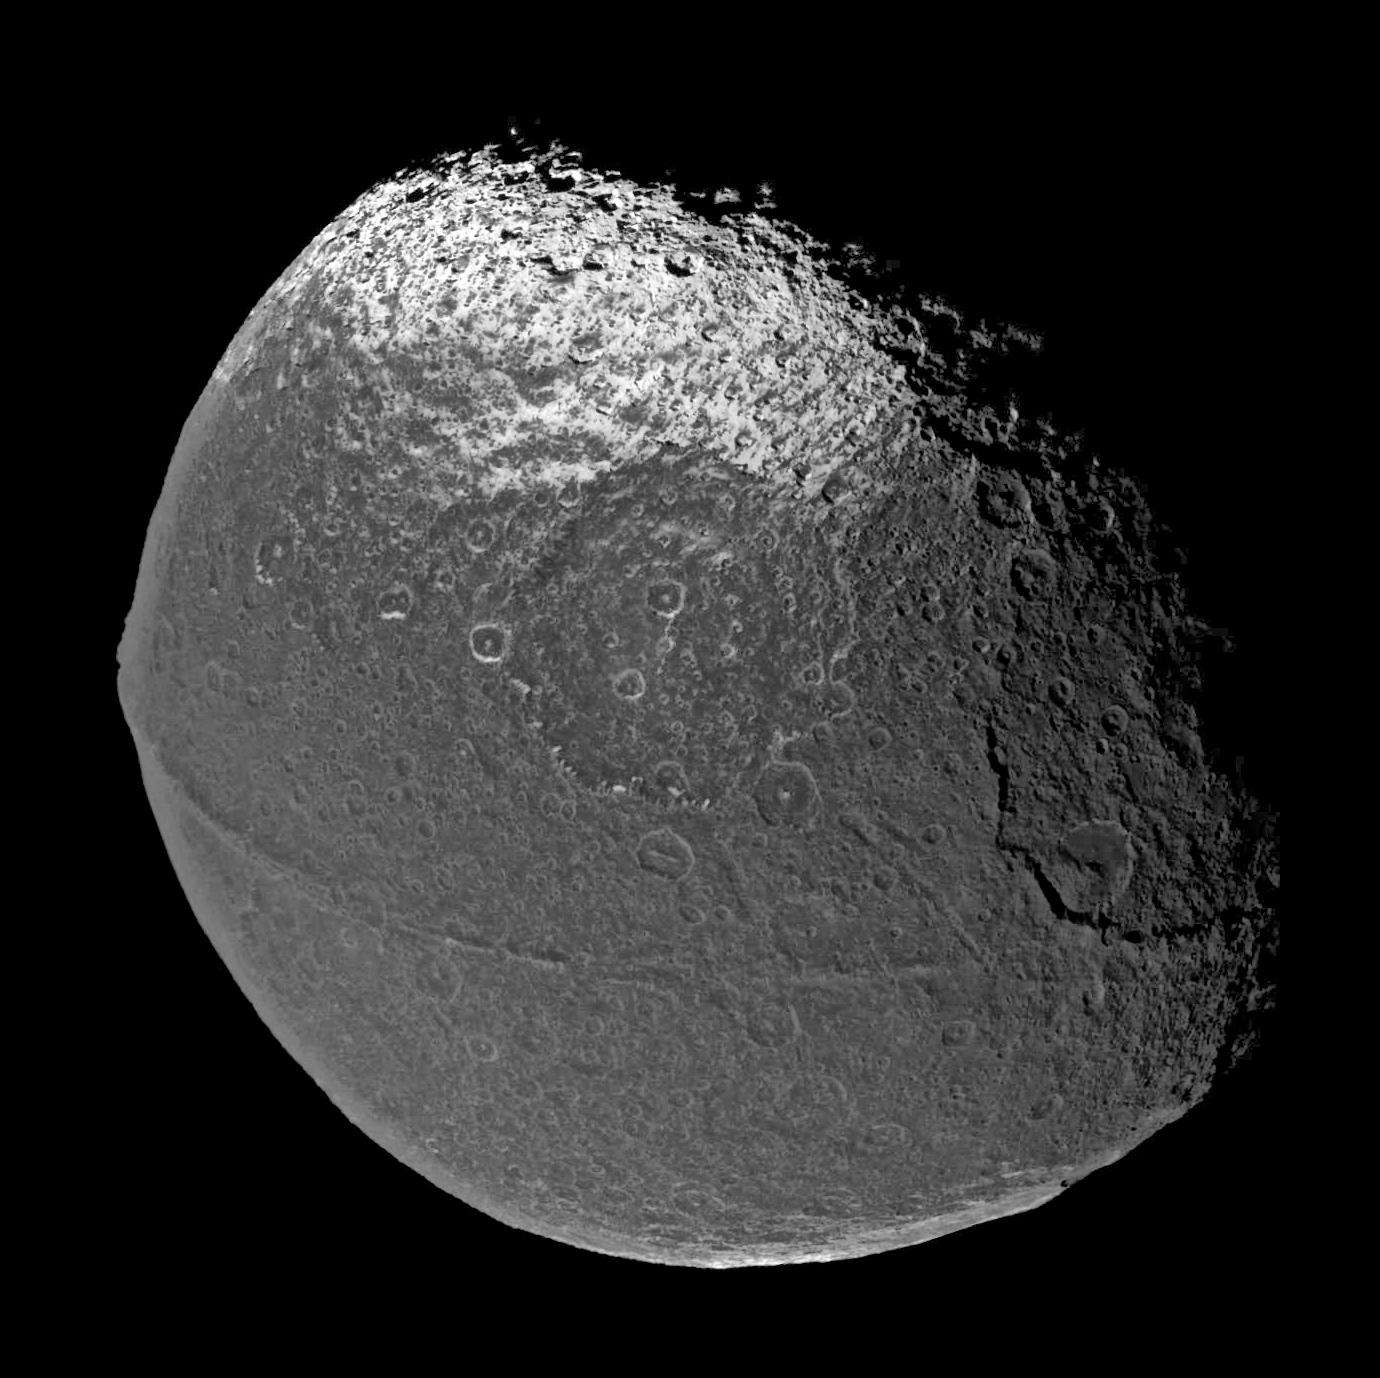 Iapetus, a moon of Saturn, has many odd features, including an immense ridge of material going around its equator. As of yet it’s still unexplained. Credit: NASA/JPL/Space Science Institute